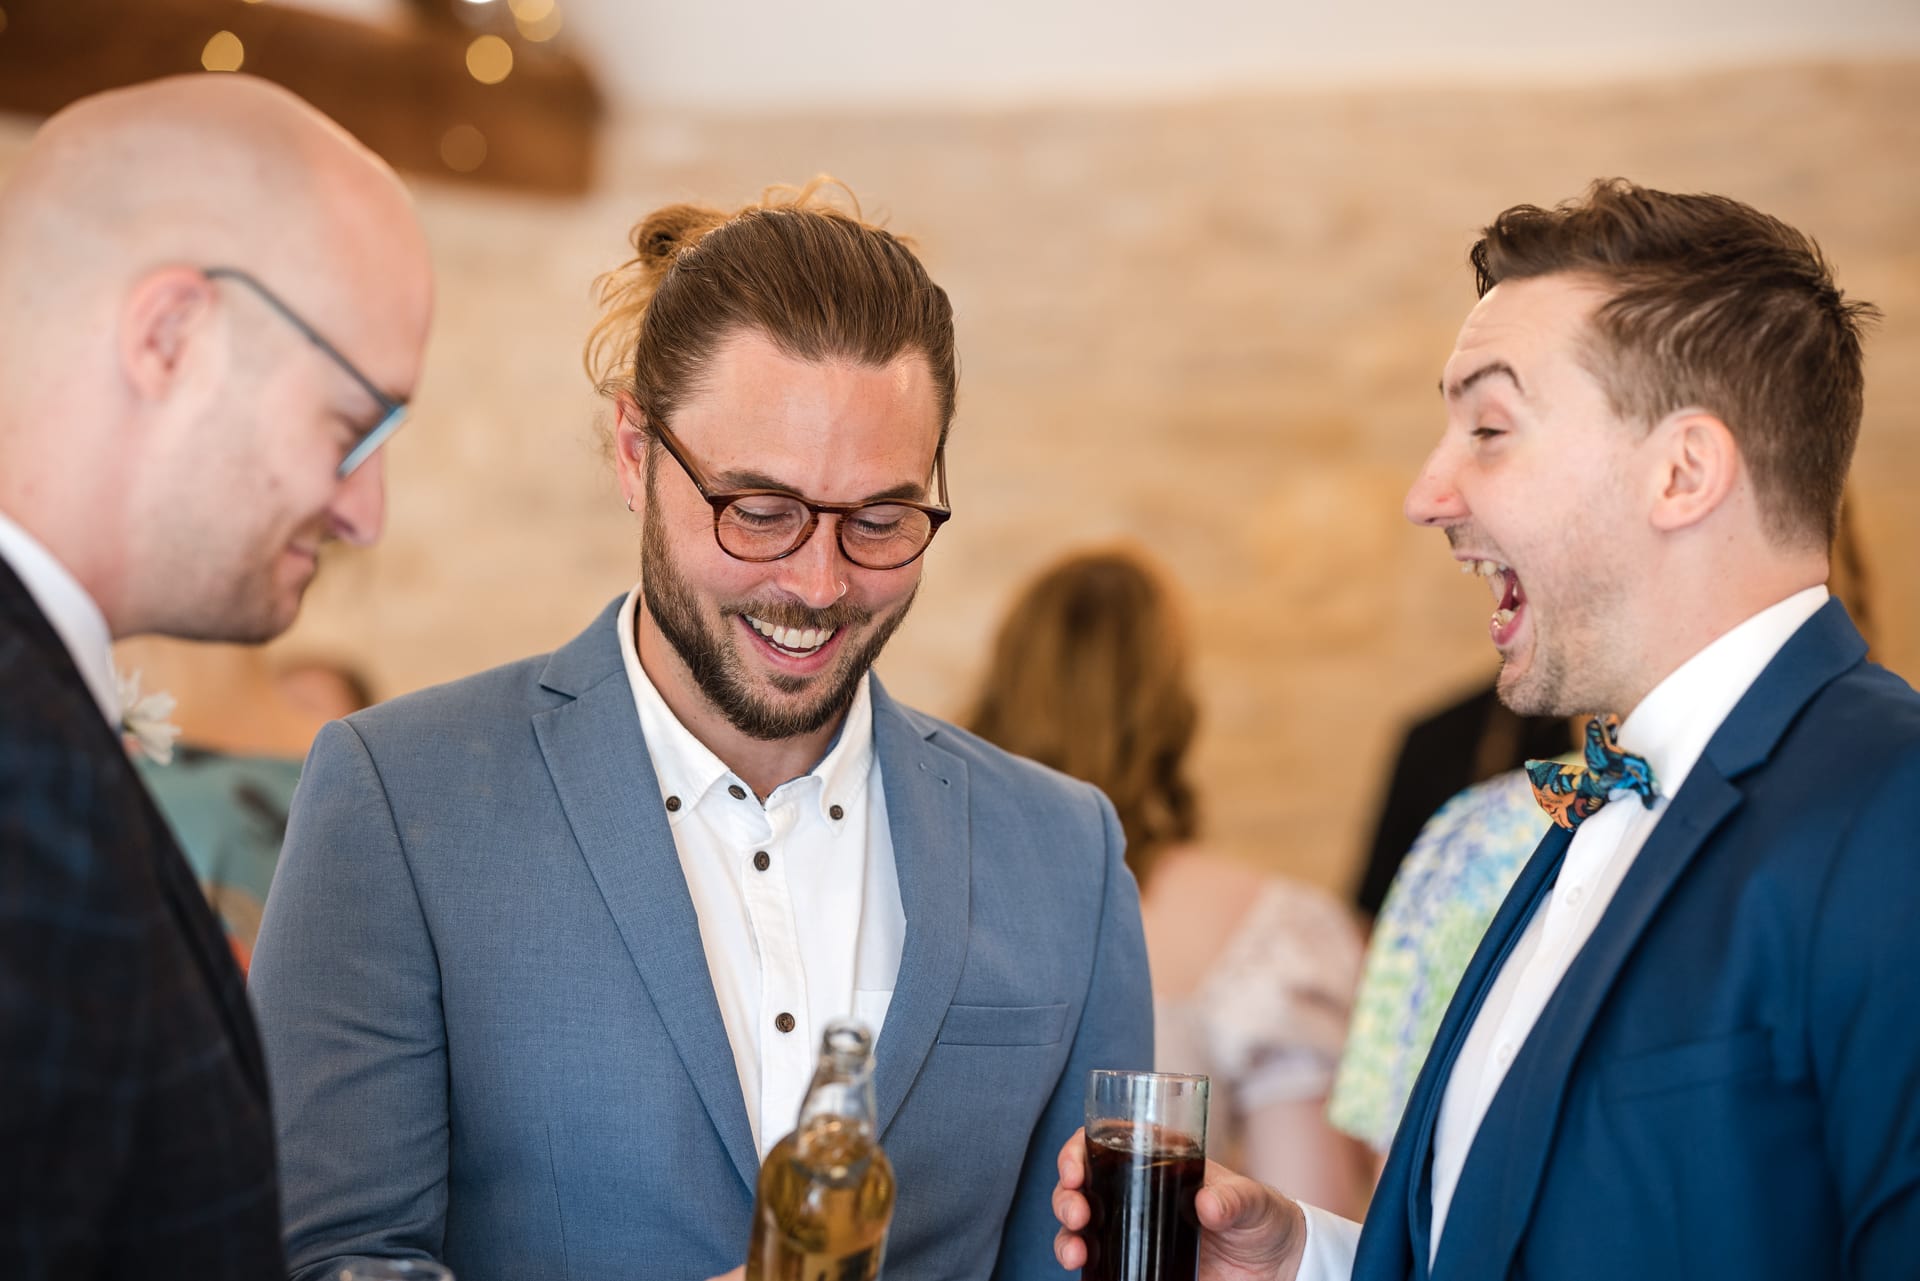 Weddings guests laughing over a drink at Kingscote Barn